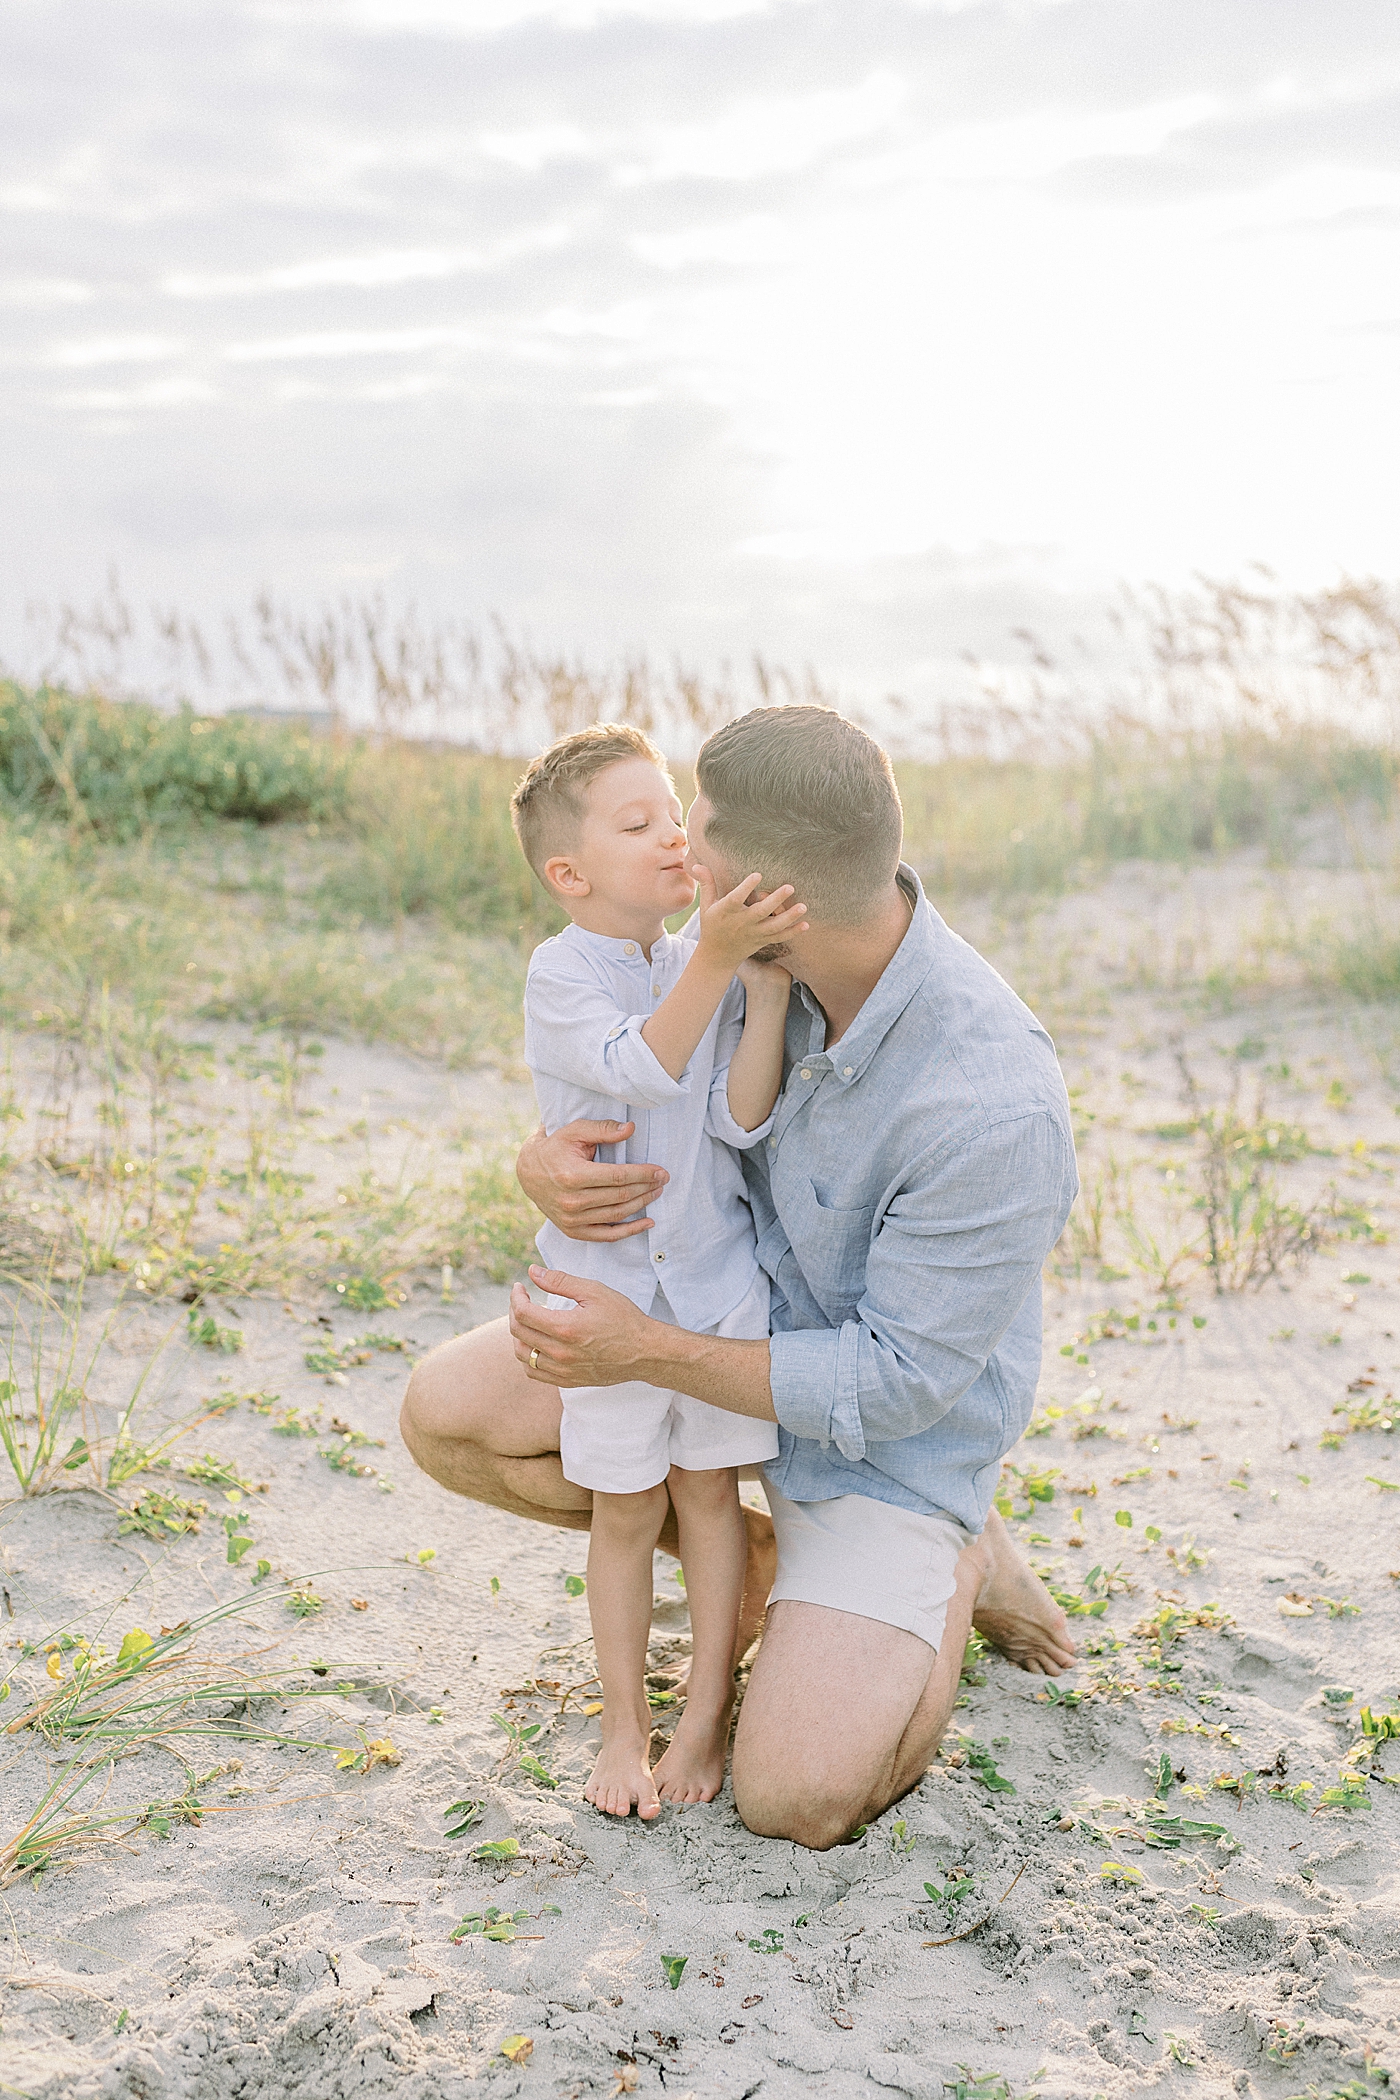 Little boy giving his dad a kiss | Image by Caitlyn Motycka